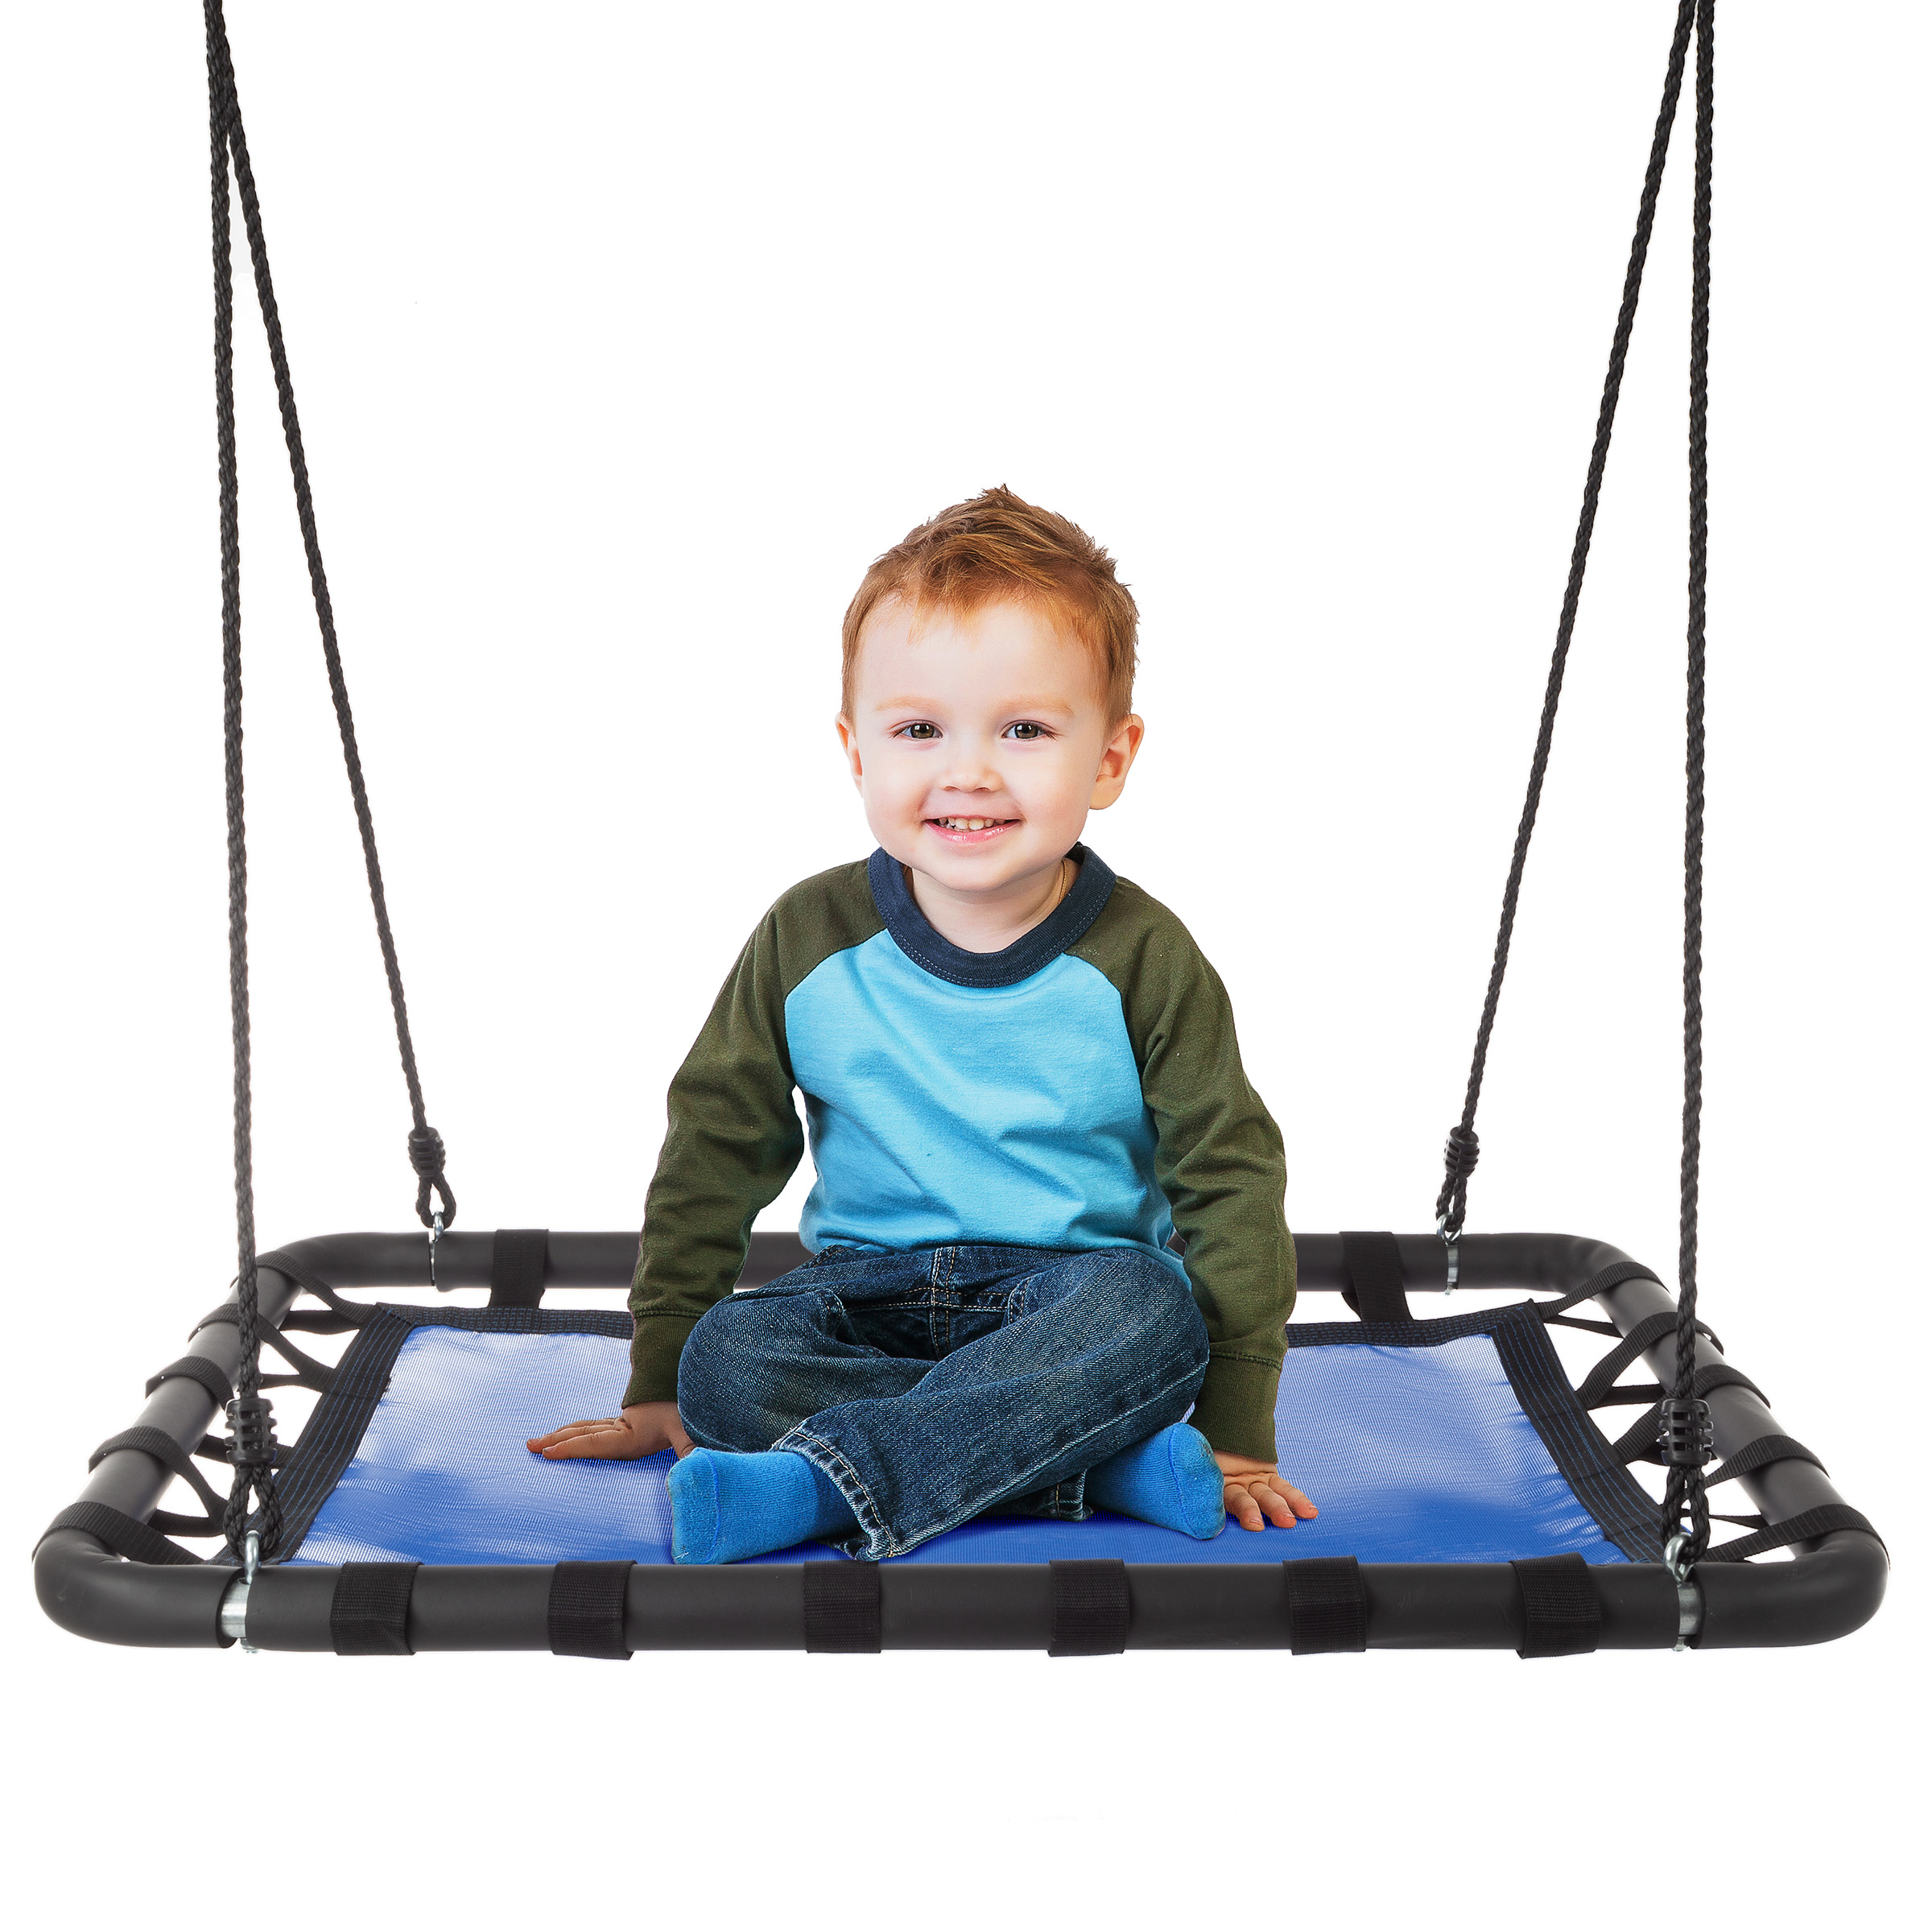 Large Platform Swing Hanging Outdoor Tree Or Playground Equipment Rectangle Bench Swing Adjustable Rope 220 Capacity